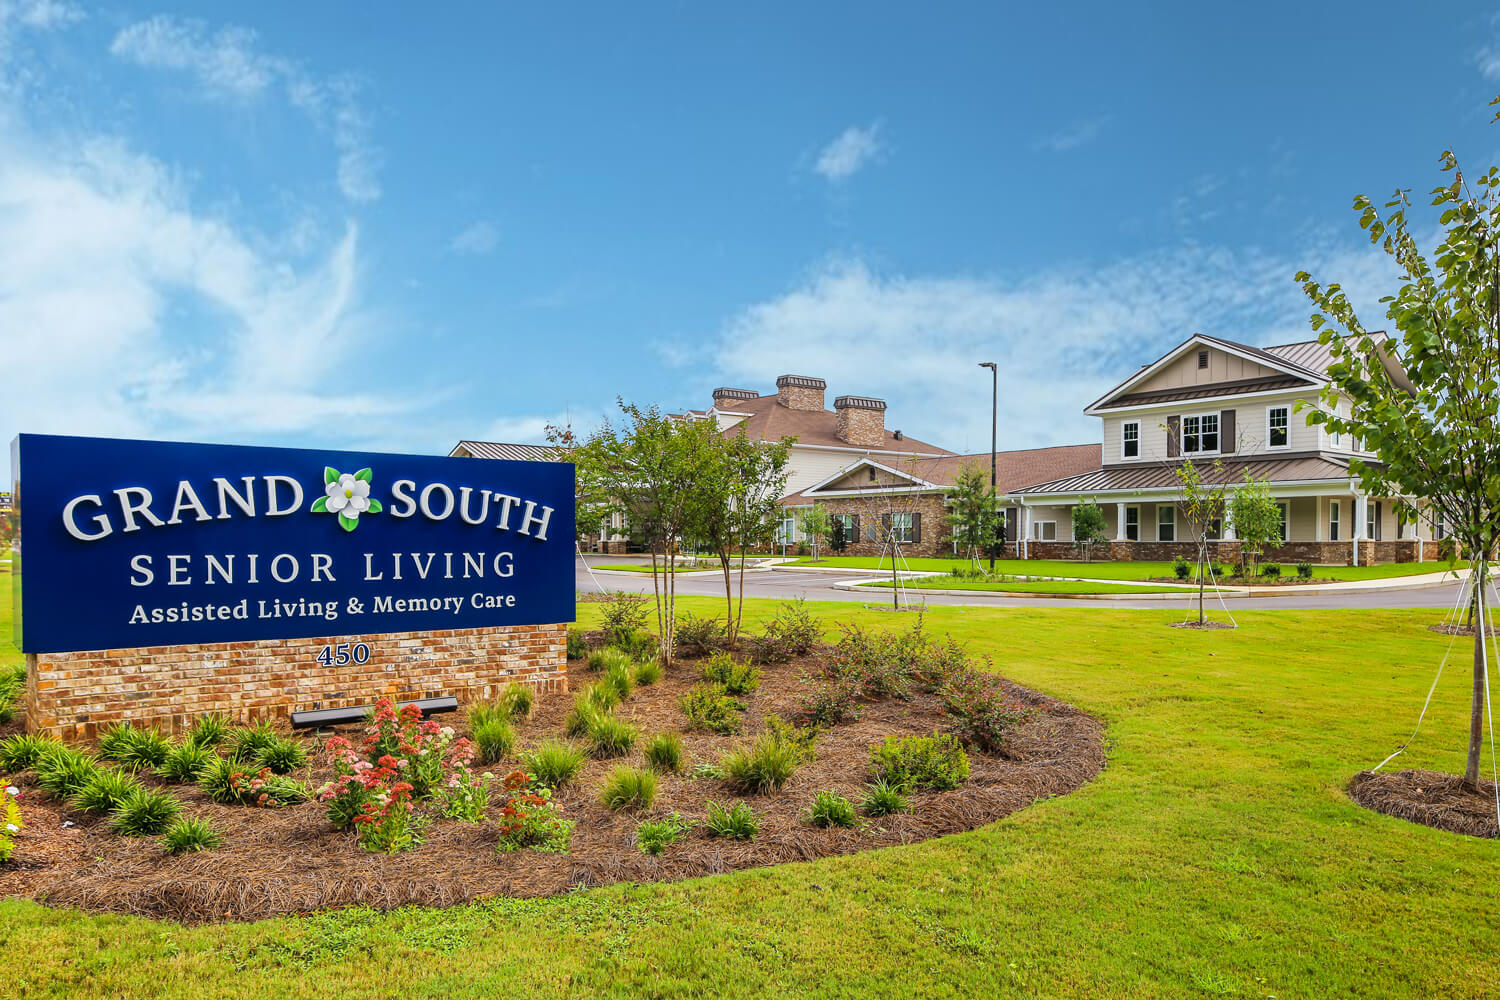 Grand South Senior Living - Exterior Sign - Designed by Foshee Architecture